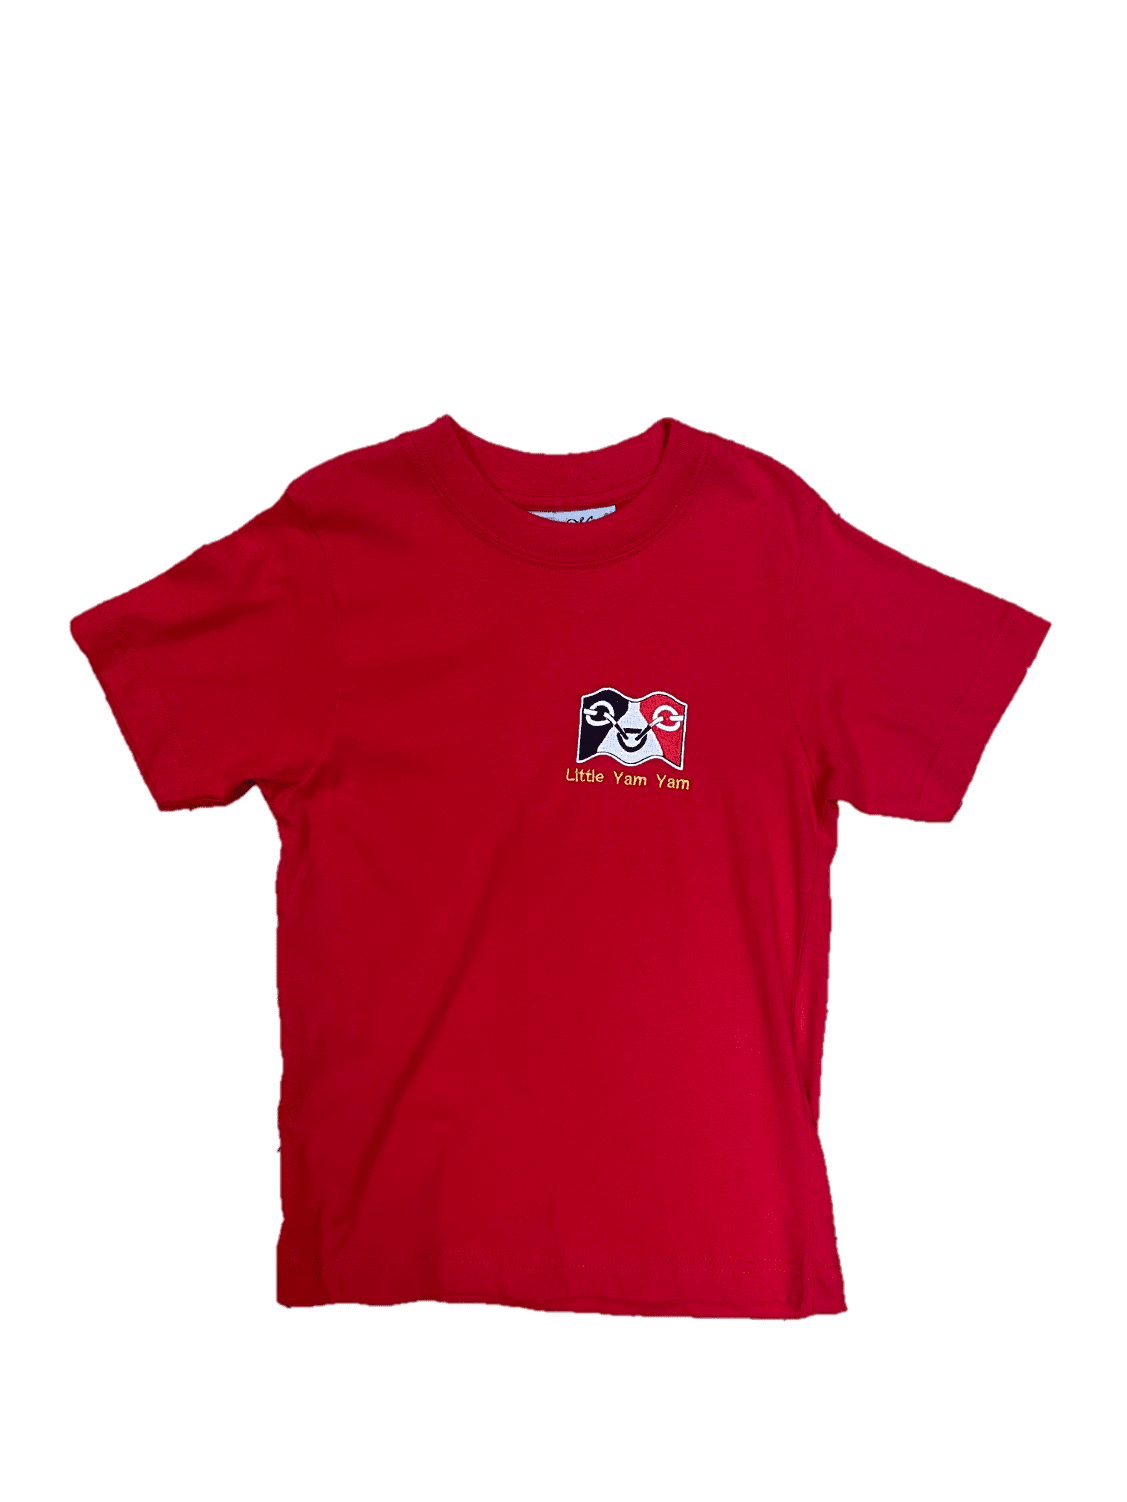 'Little Yam Yam' Black Country Kids T-shirt (Unisex) - Red - DANCERS